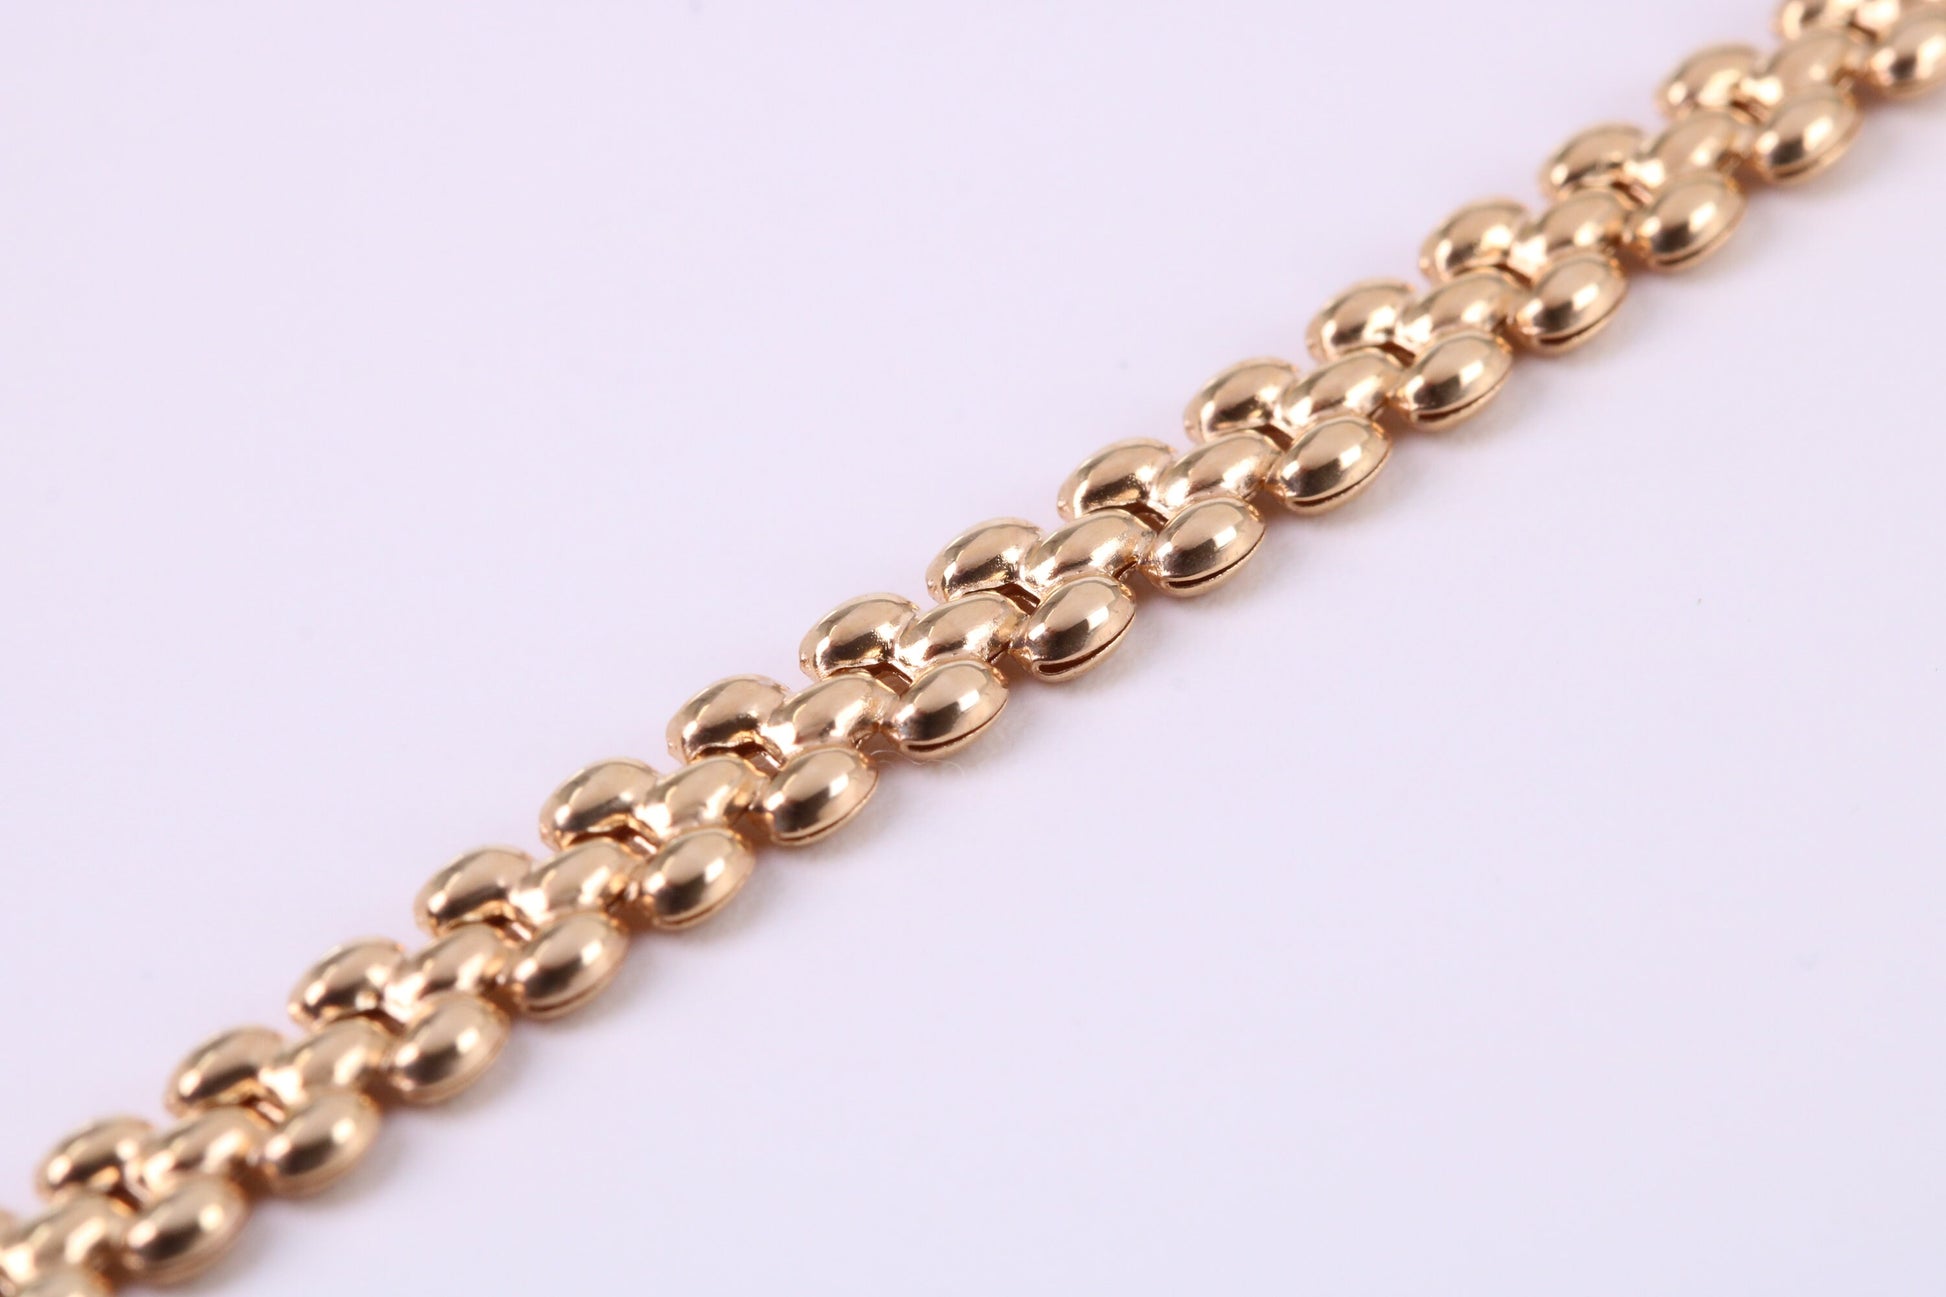 Fancy Link Bracelet, Made From Solid Yellow Gold, British Hallmarked, Luxury Gift Boxed